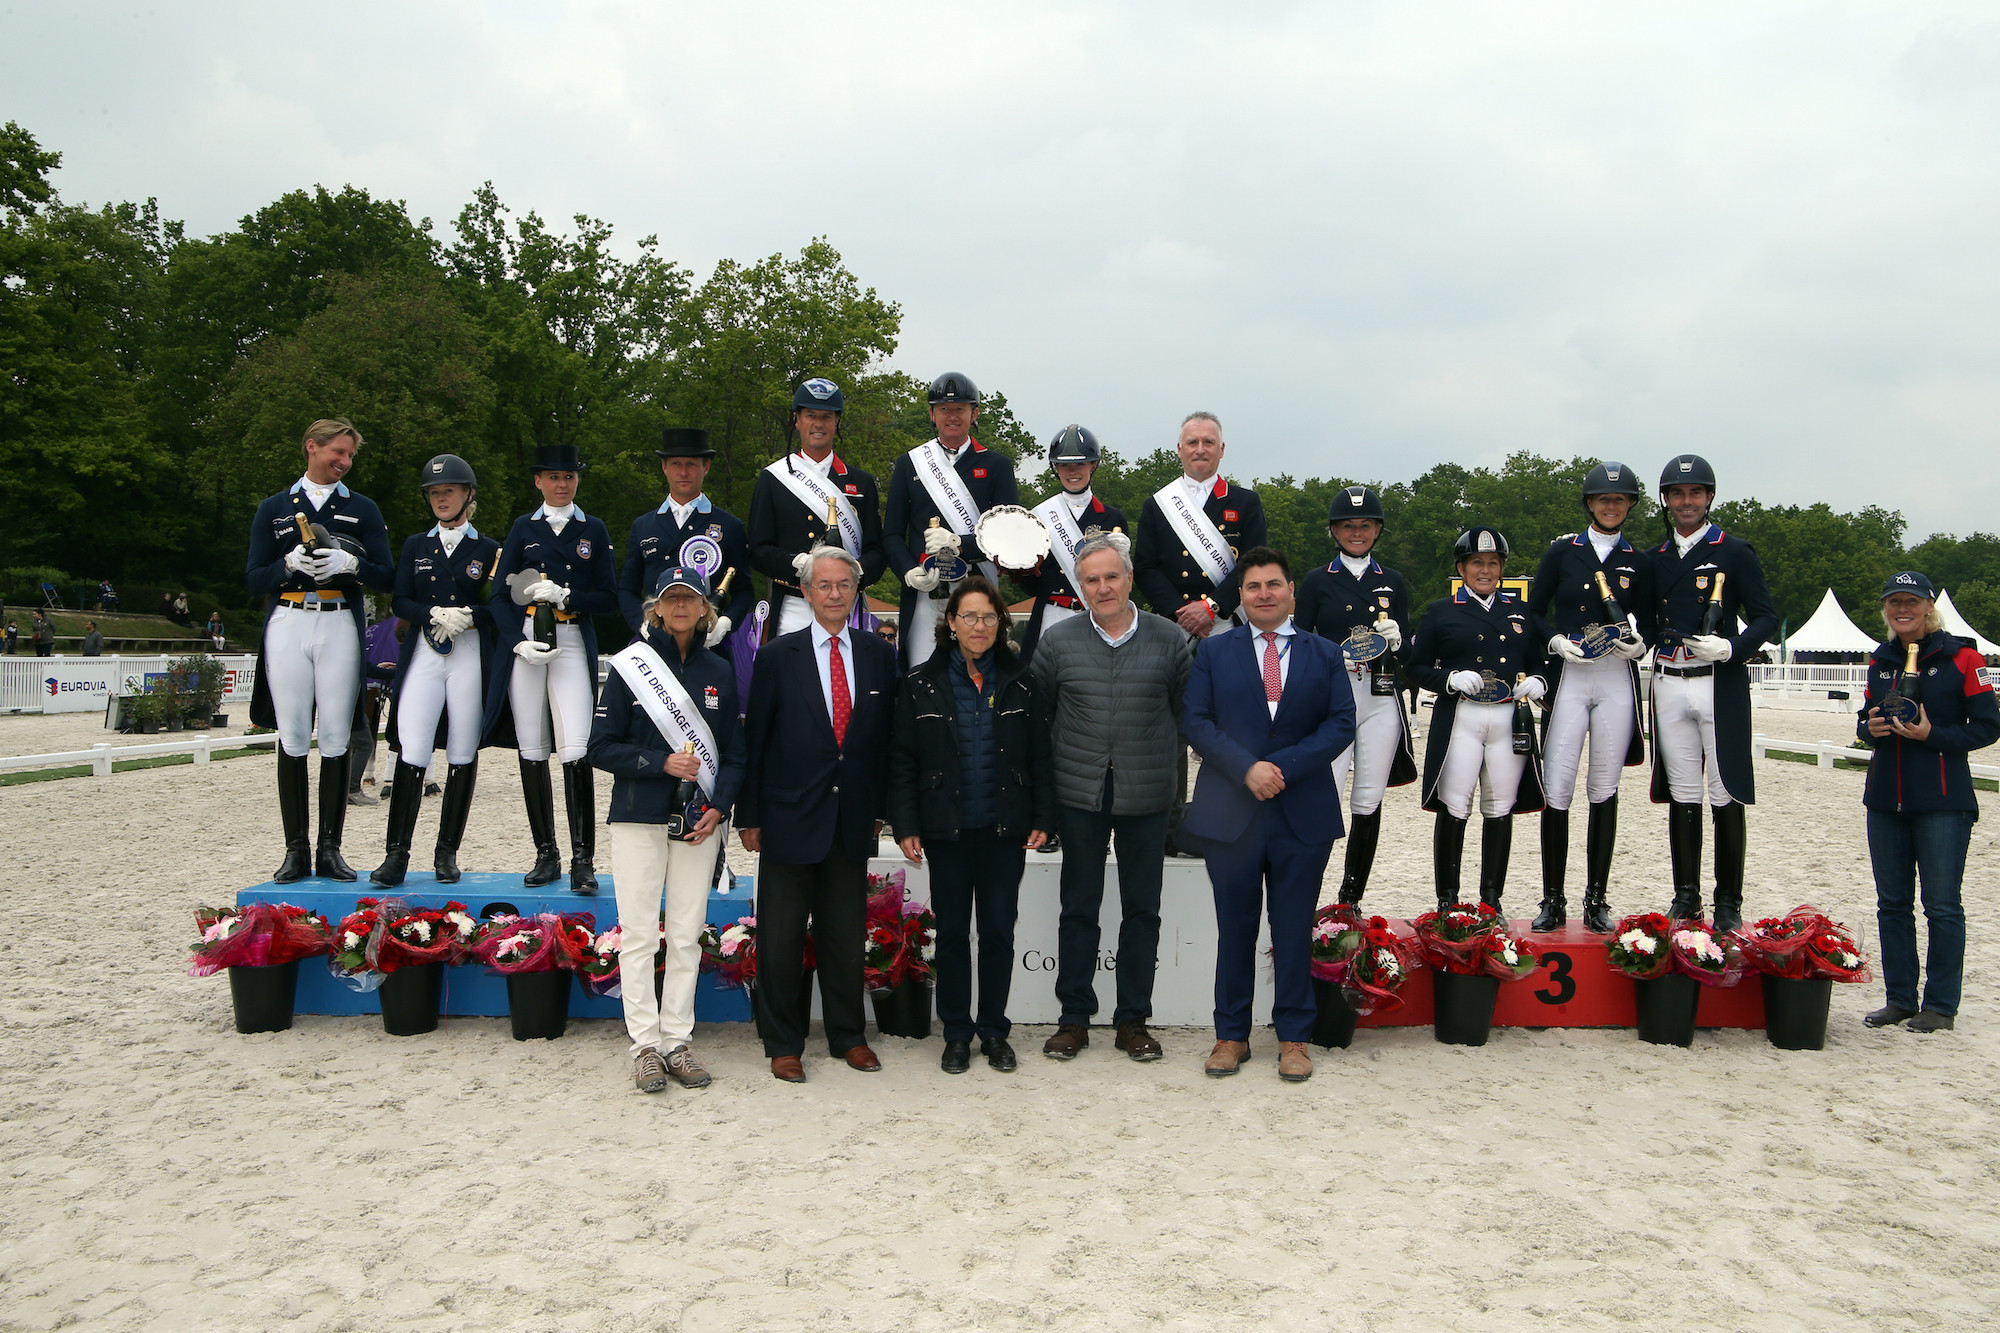 Britain maintained a steady lead before securing victory during the second leg of the series ©FEI